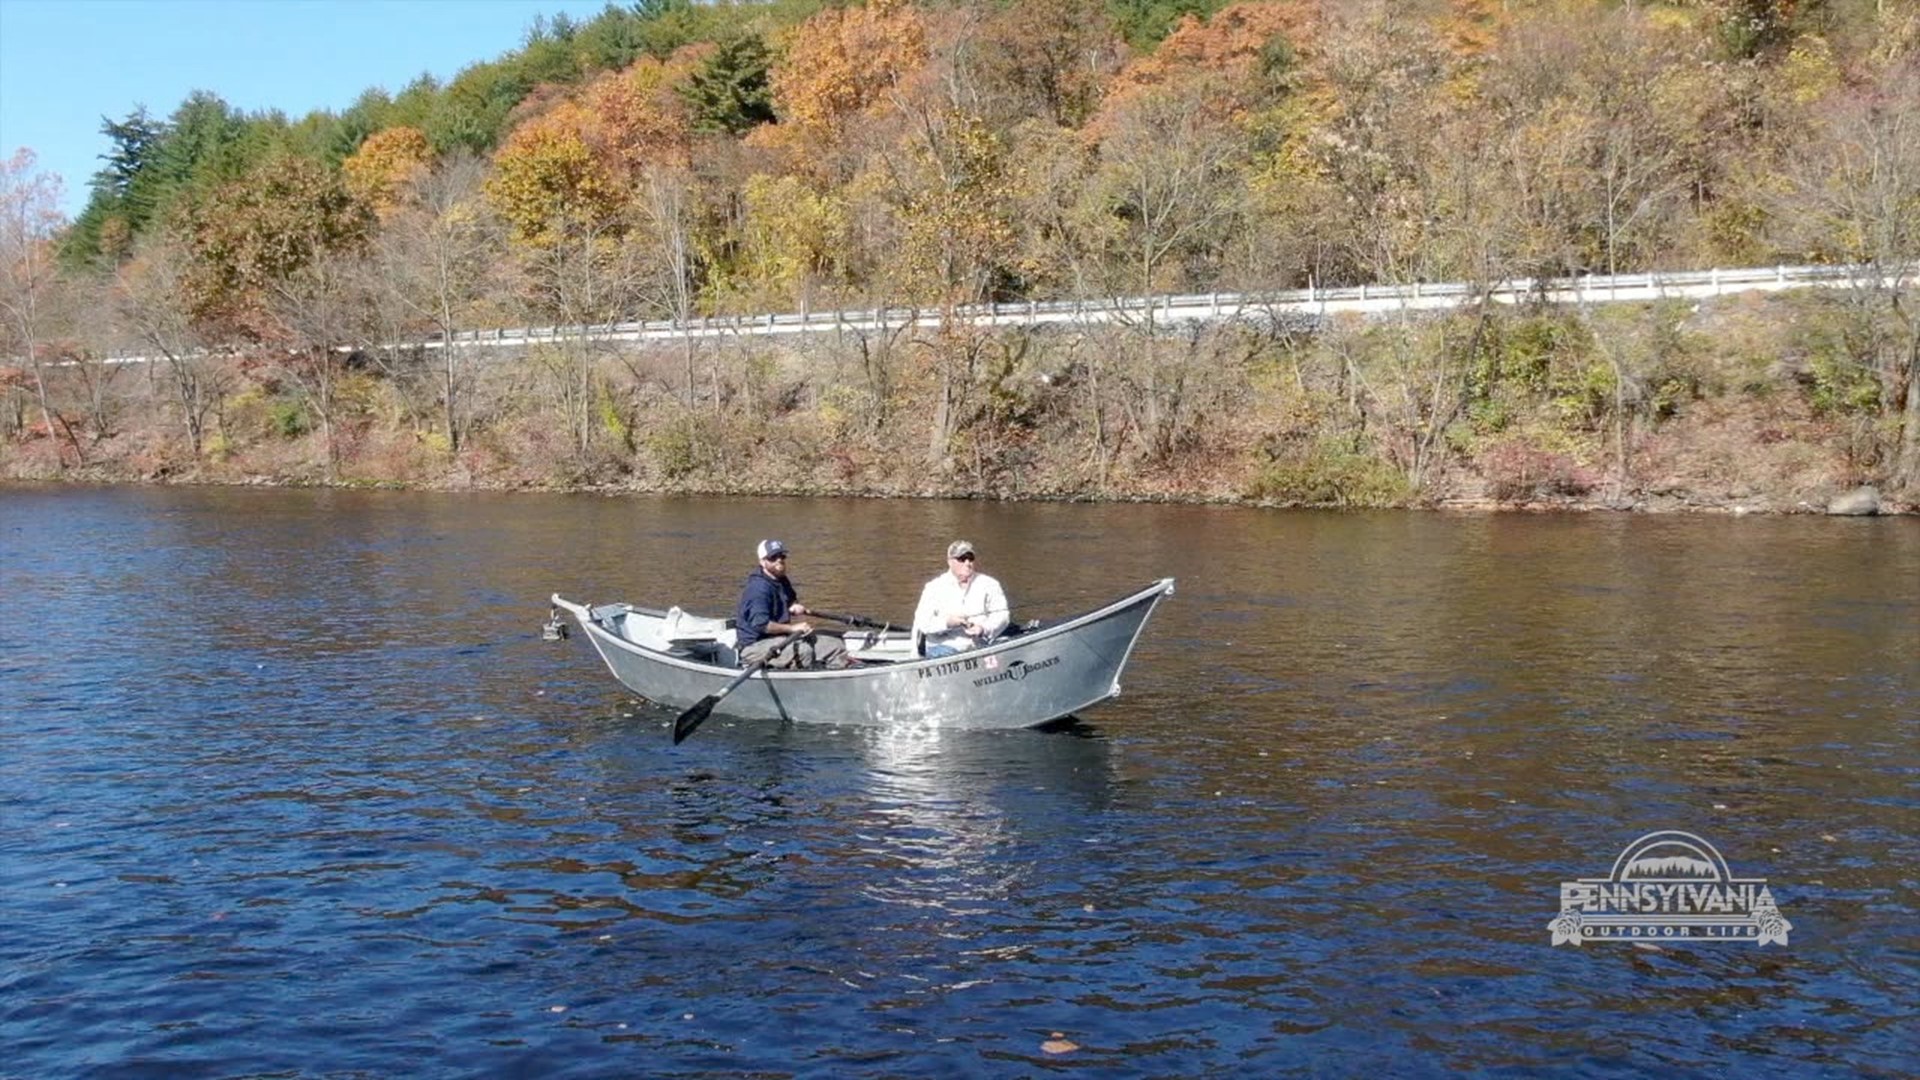 An exciting float down the Lehigh River in search of trout.